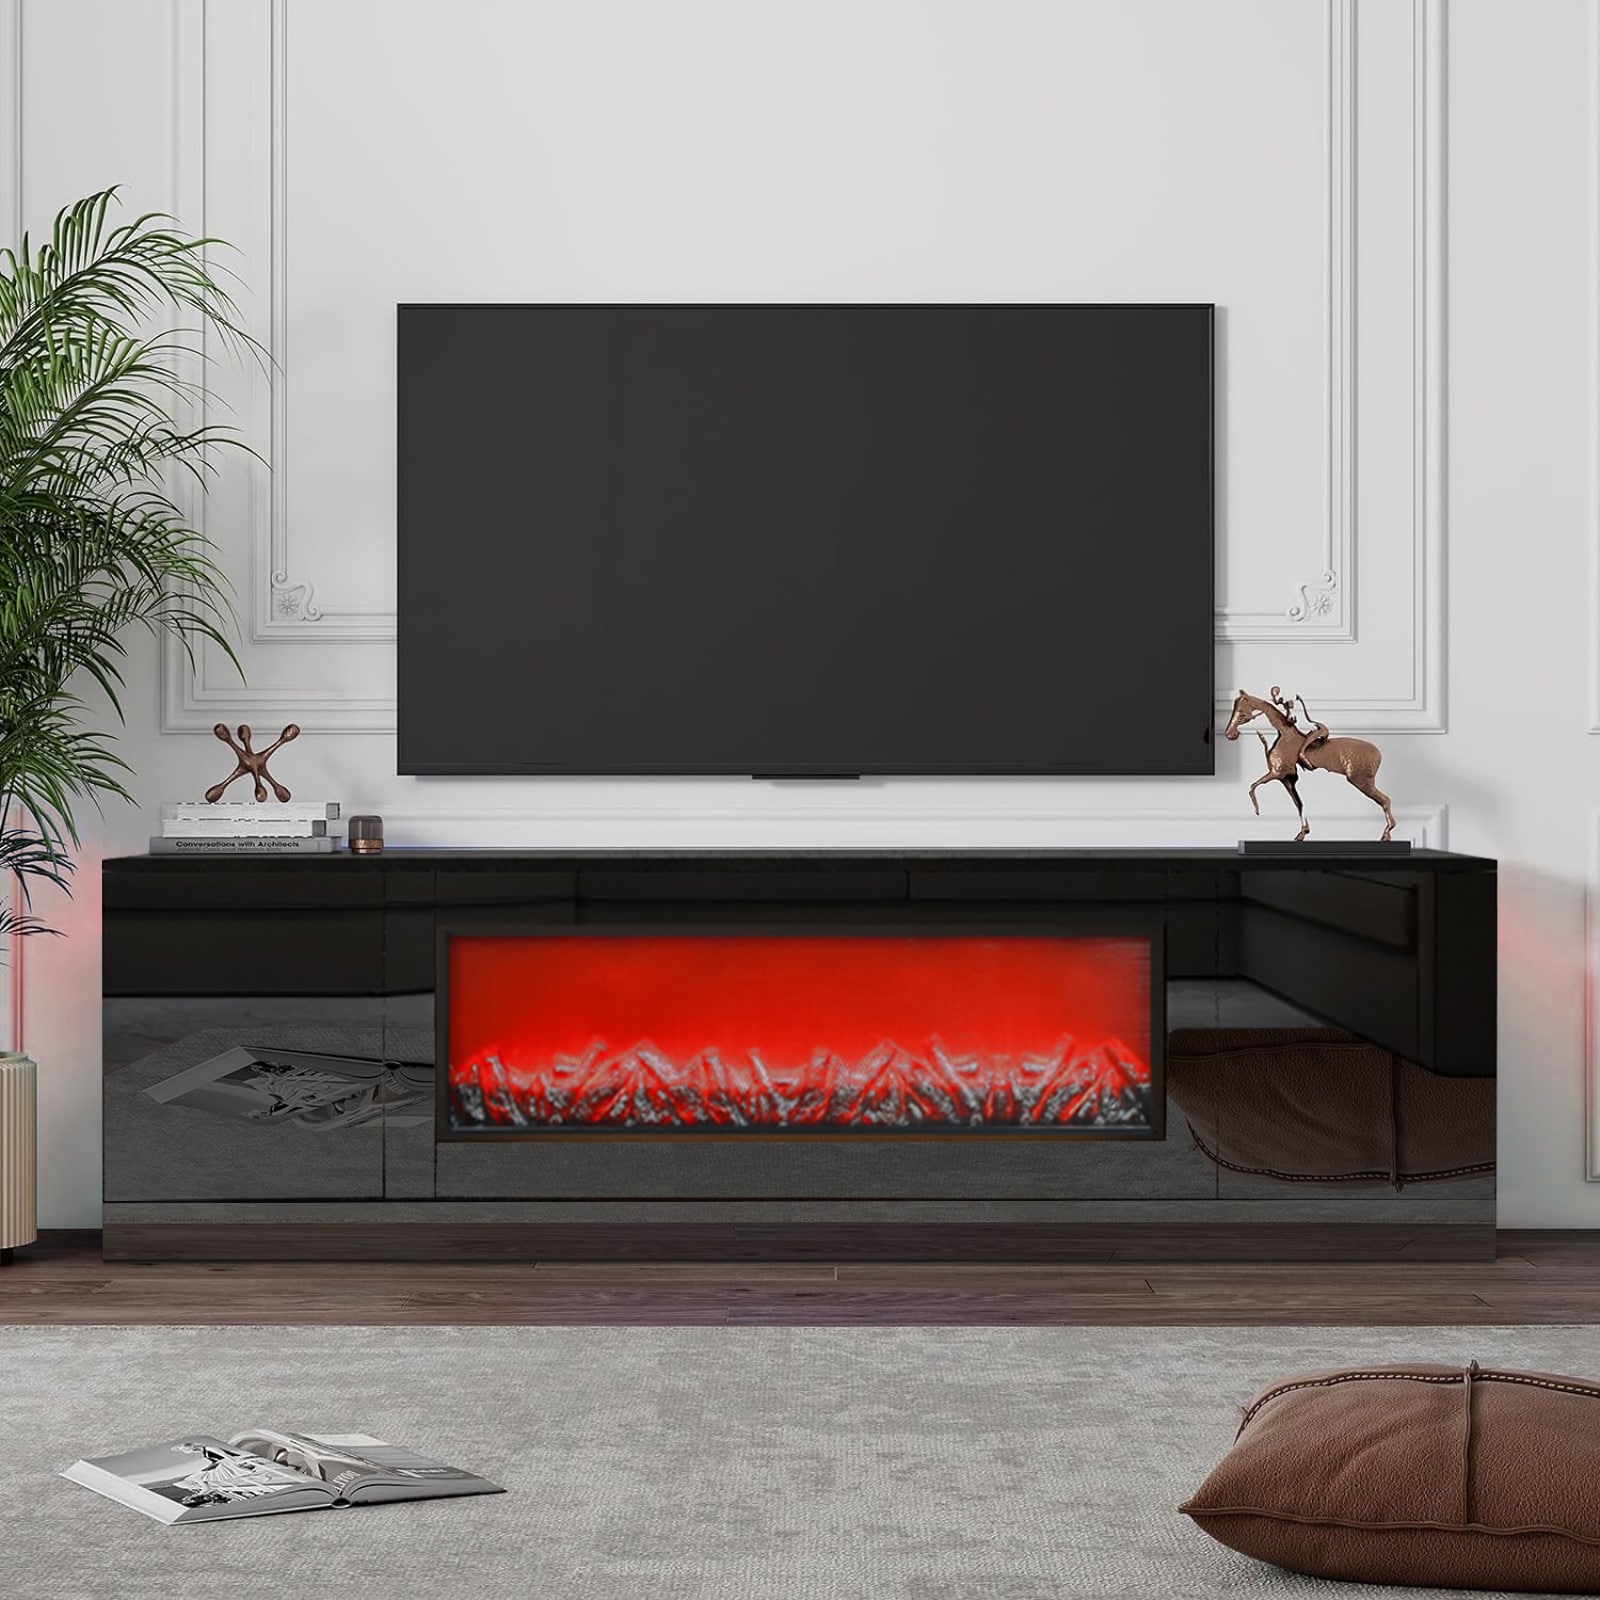 Maocao Hoom 70.87-in W Black TV Stand with No Heat Electric Fireplace ...